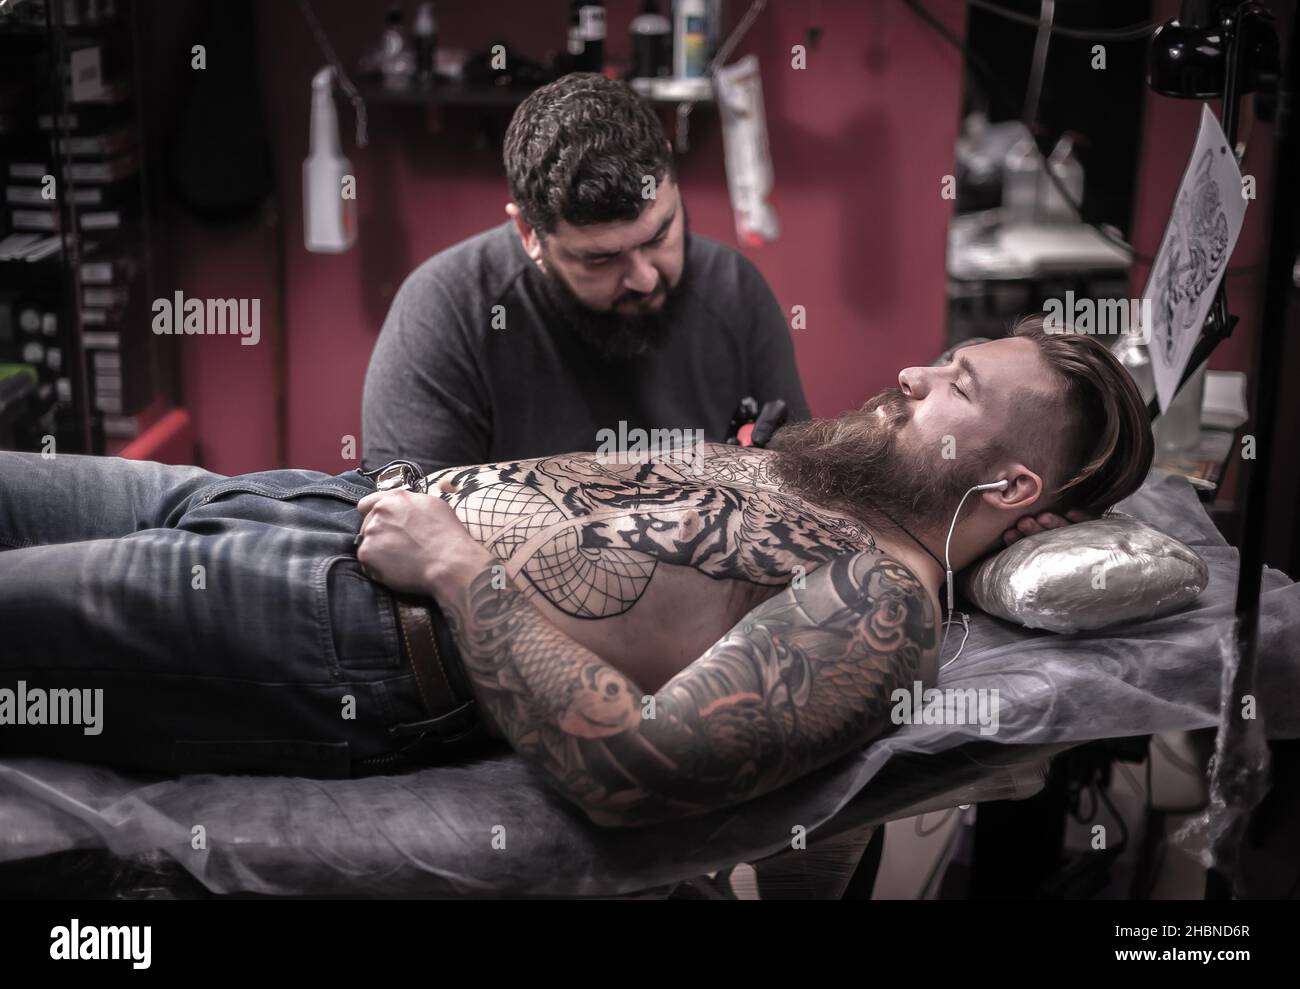 Want to Become a Professional Tattoo Artist? - Florida Tattoo Academy